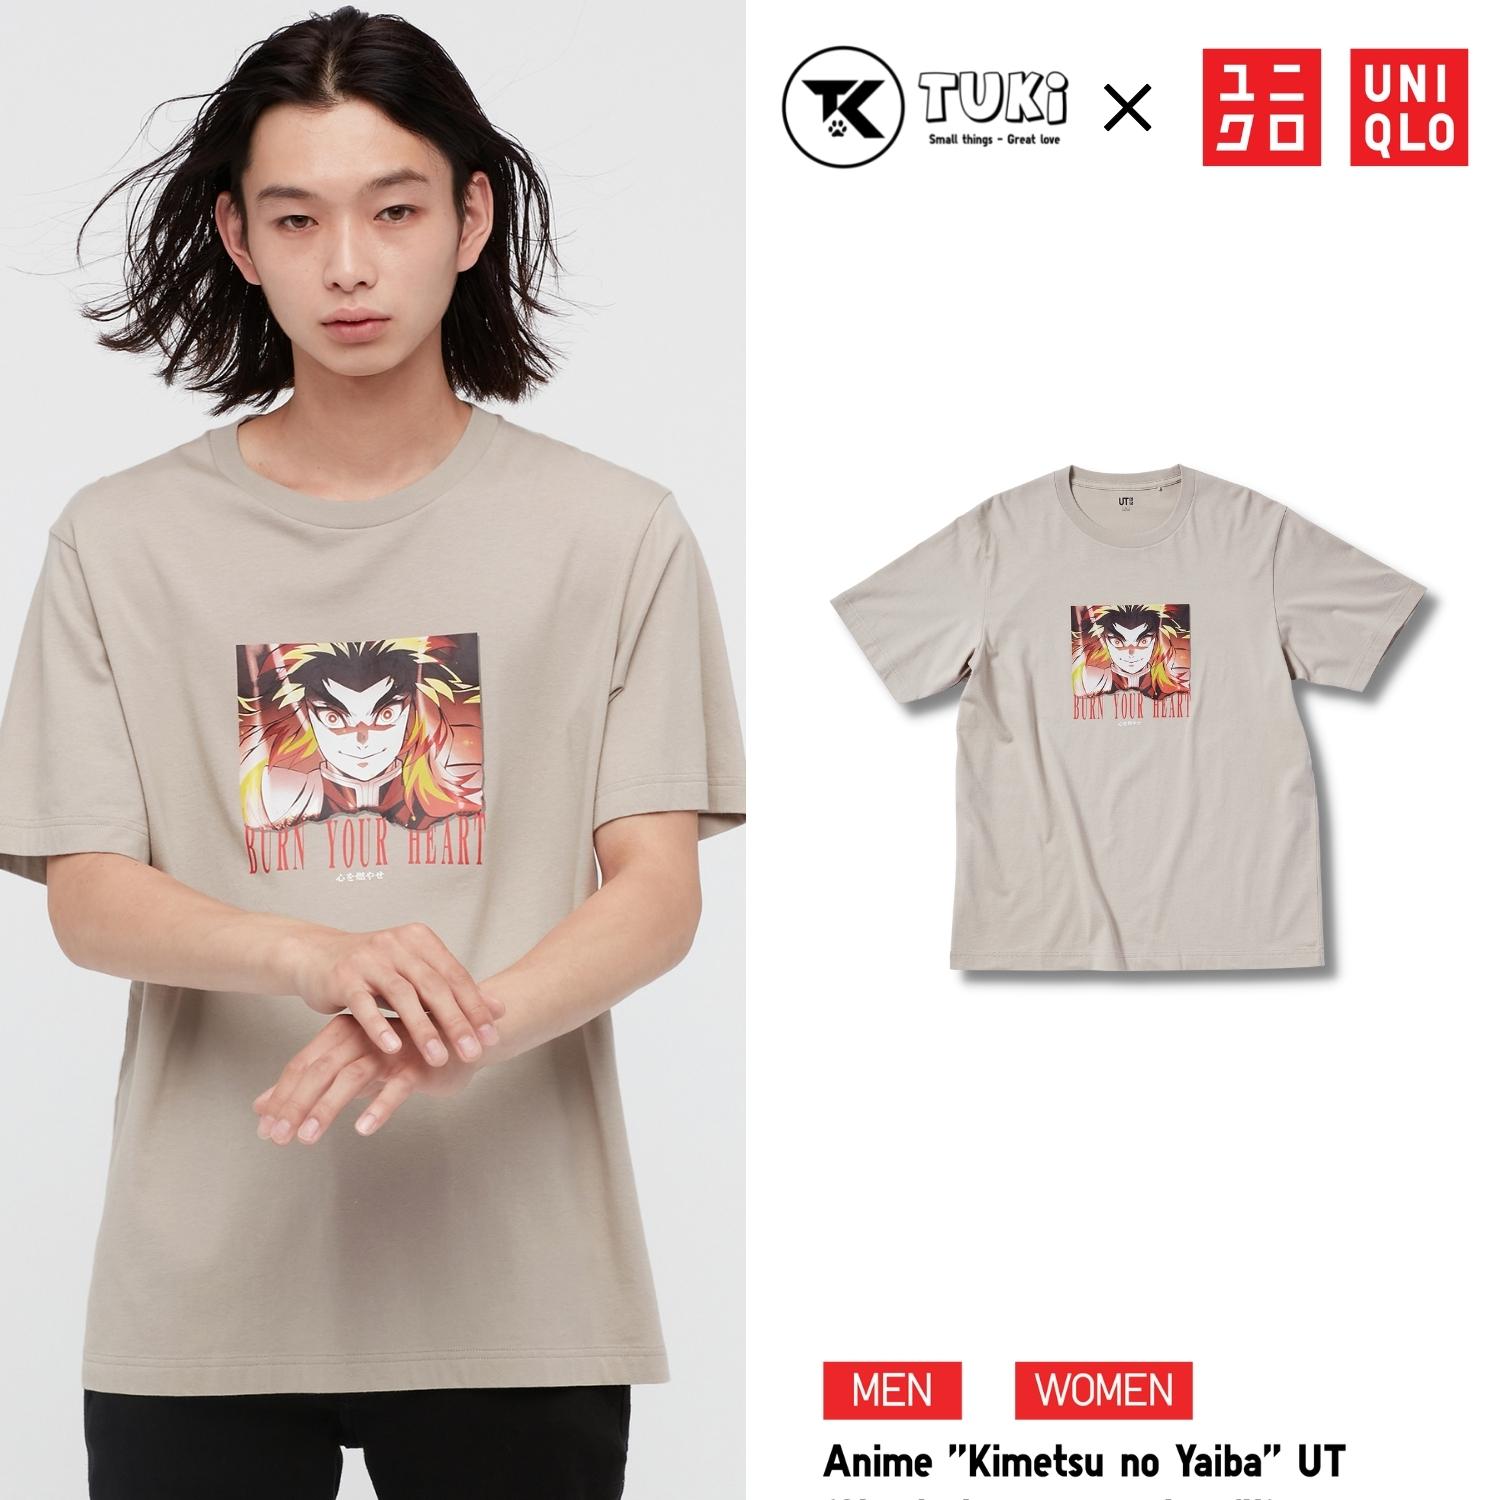 UNIQLO x Demon Slayers 3rd Collection Has Even More Tees  Bags